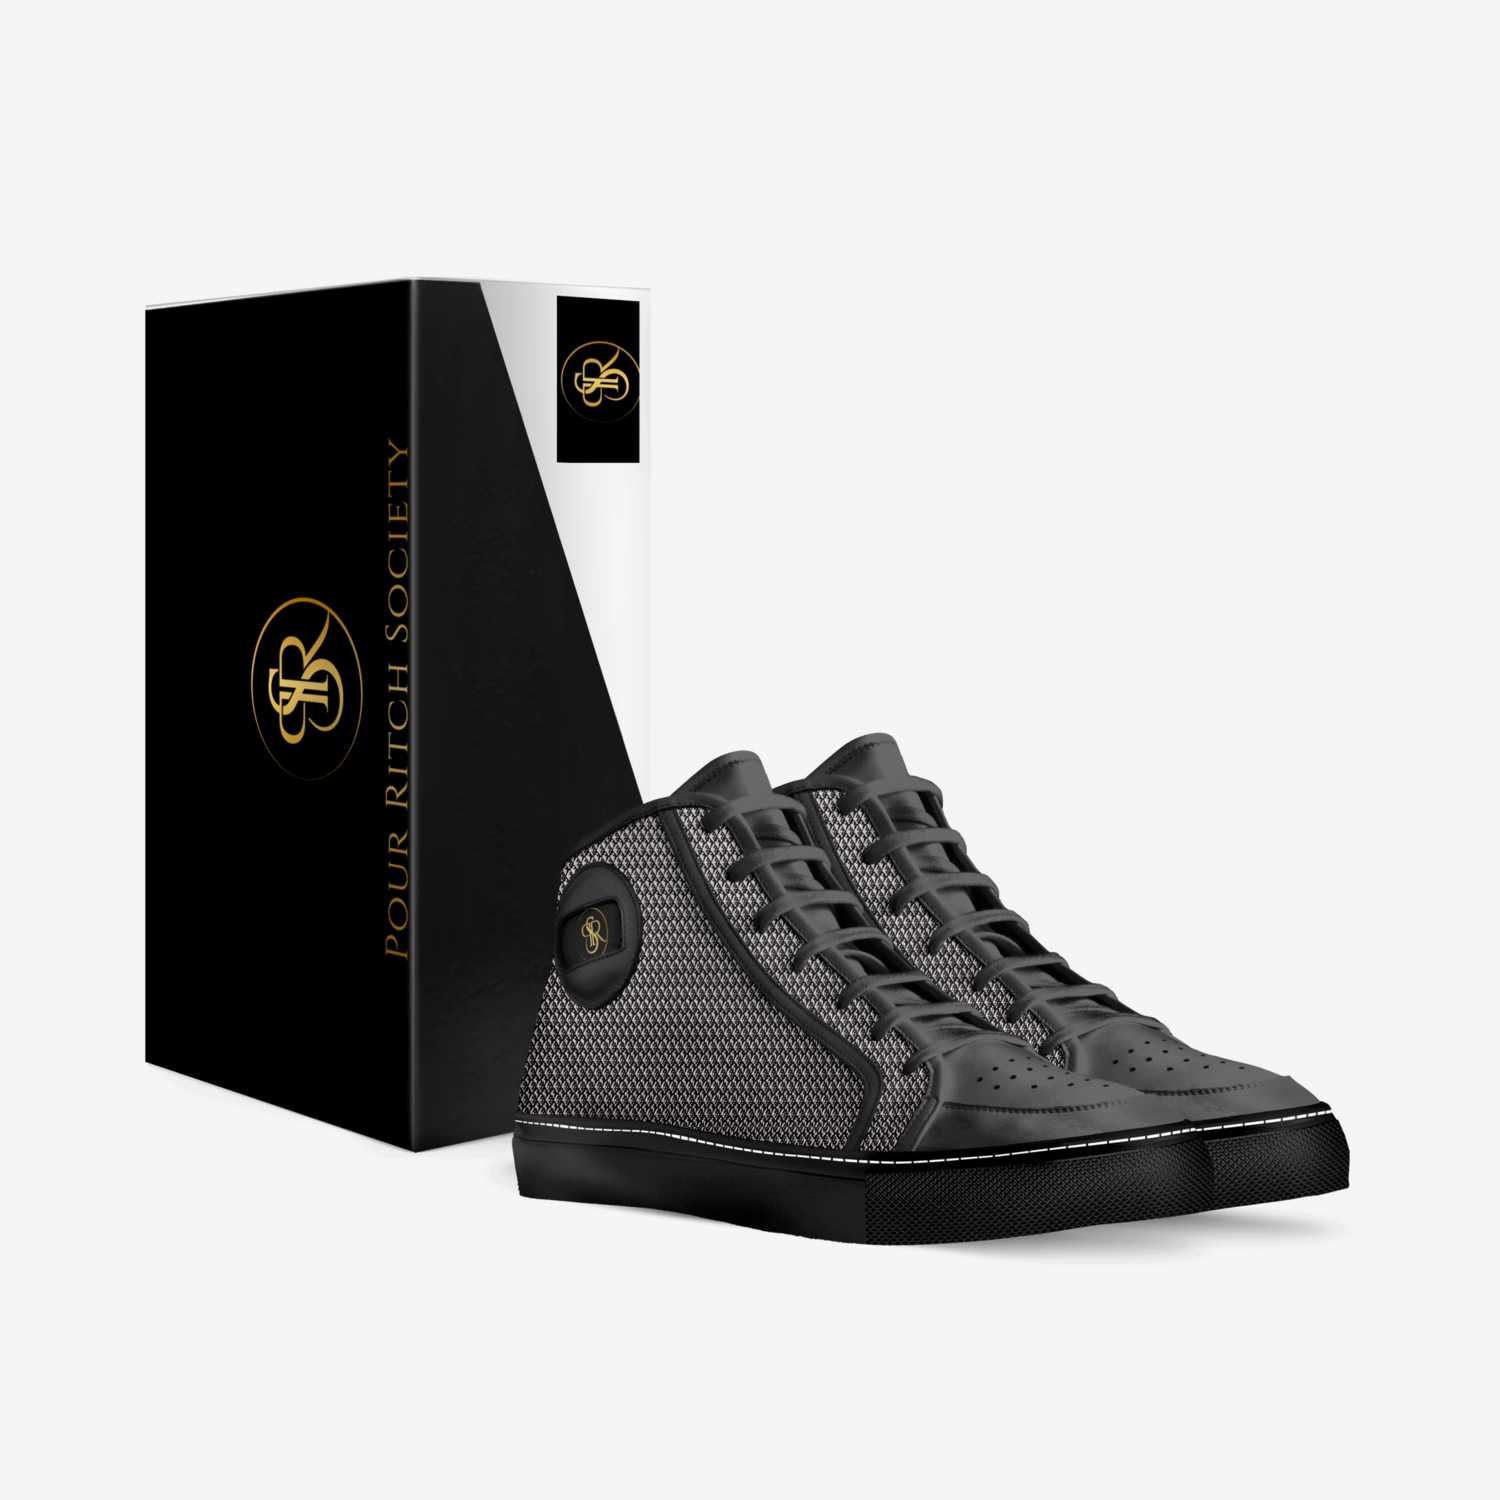 Pour Ritch Society custom made in Italy shoes by Eb Ritch | Box view